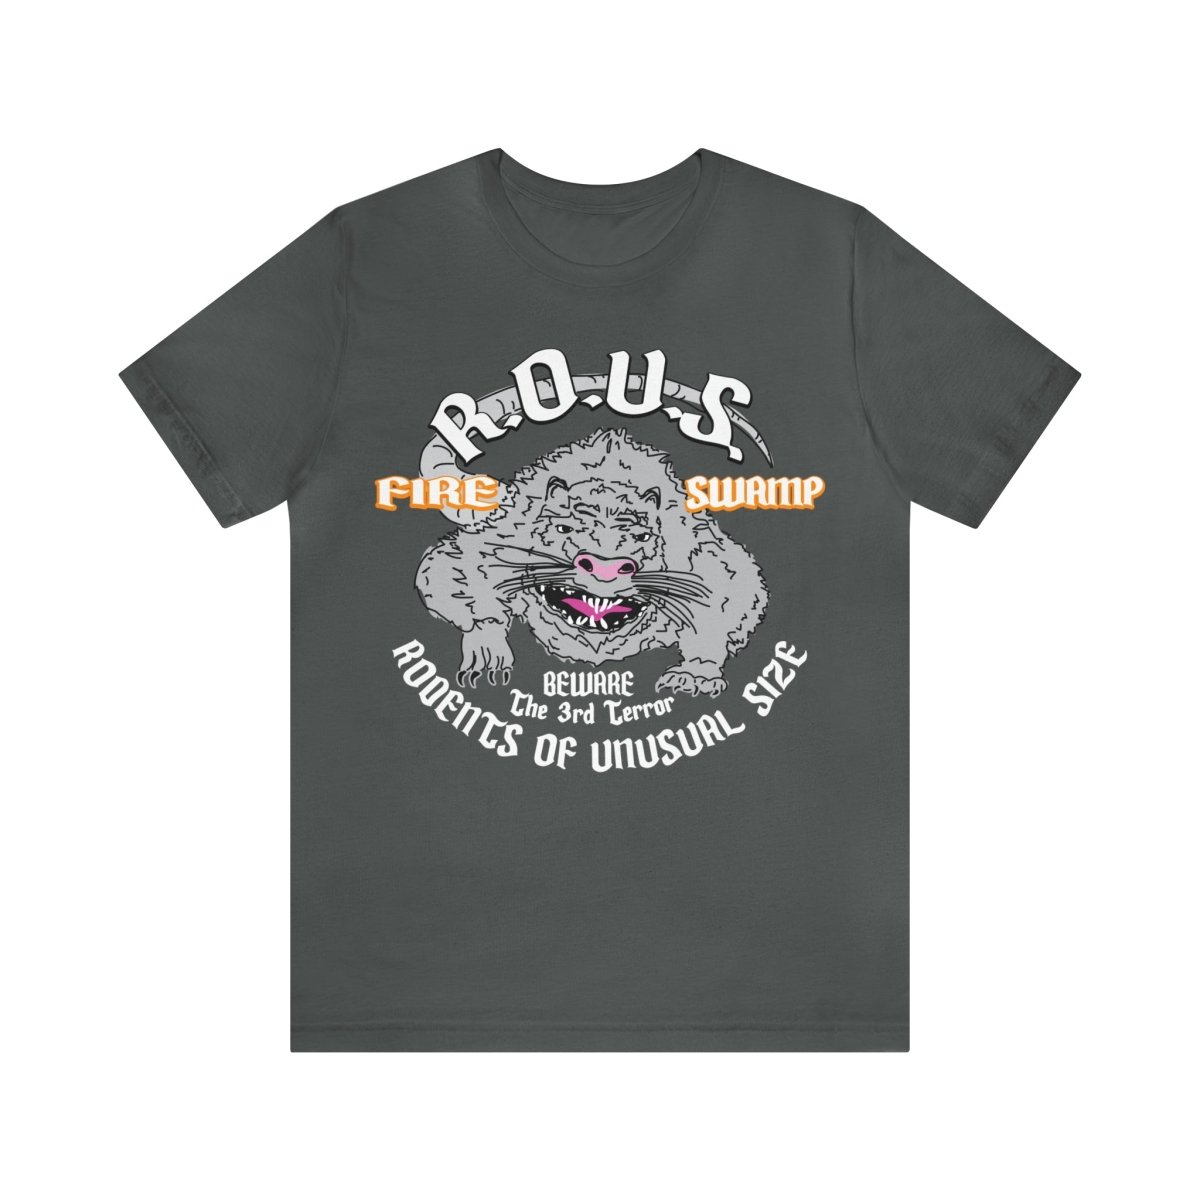 Fire Swamp R.O.U.S. Premium T-Shirt, Fairytale Hero, Princess Rescue, Fire Swamp, Rodents Of Unusual Size, Funny